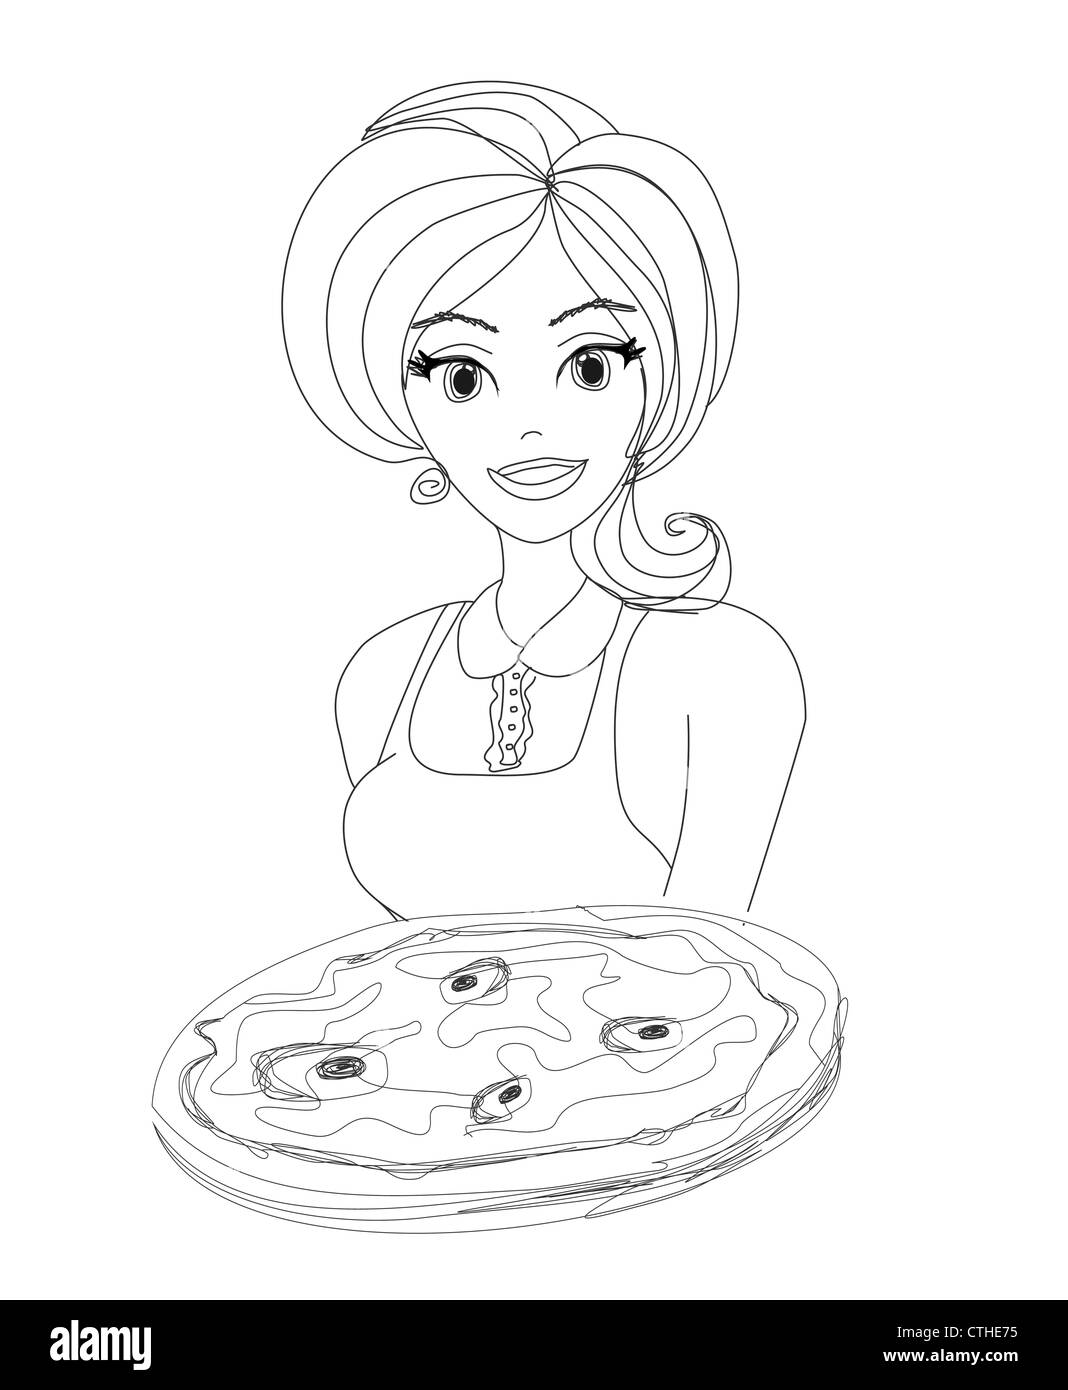 Young waitress with pizza doodle Stock Photo